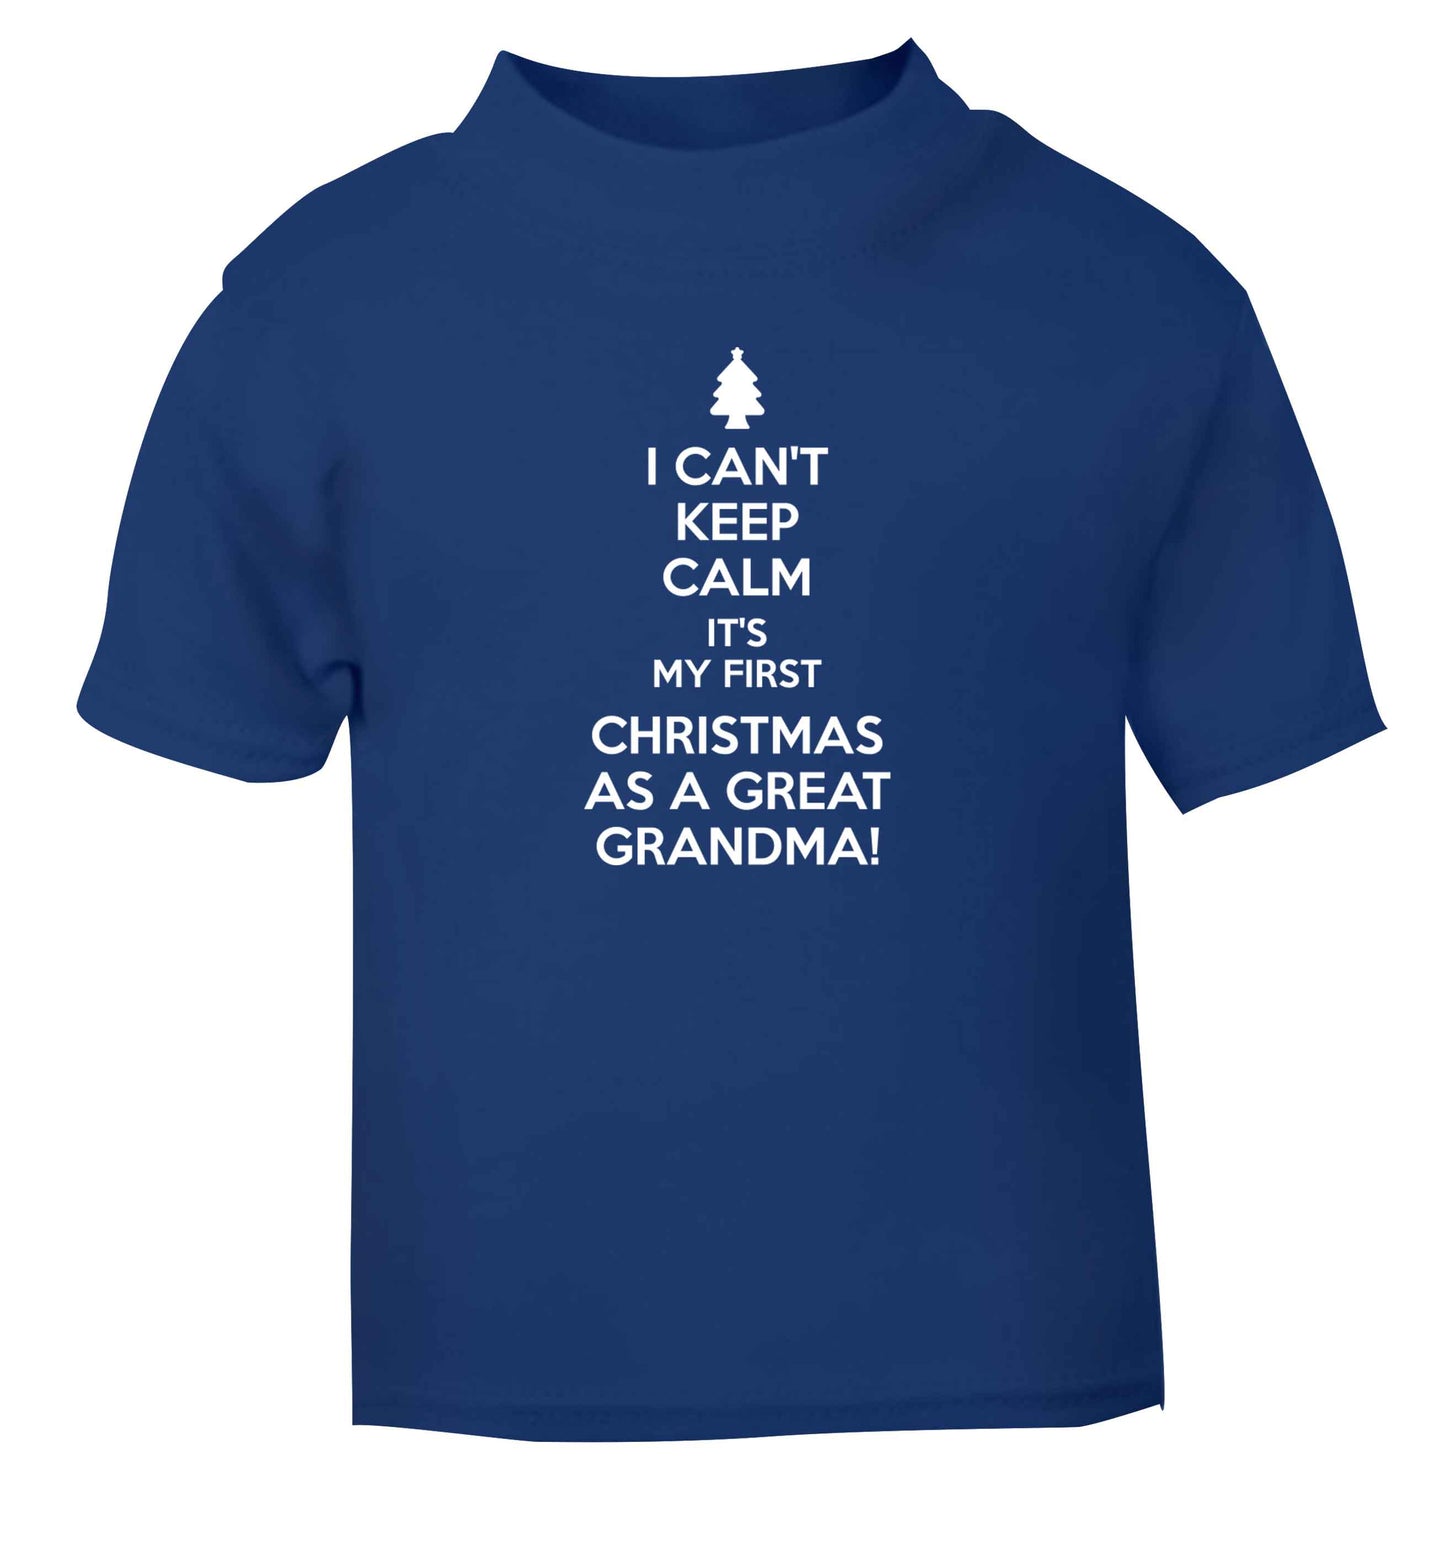 I can't keep calm it's my first Christmas as a great grandma! blue Baby Toddler Tshirt 2 Years